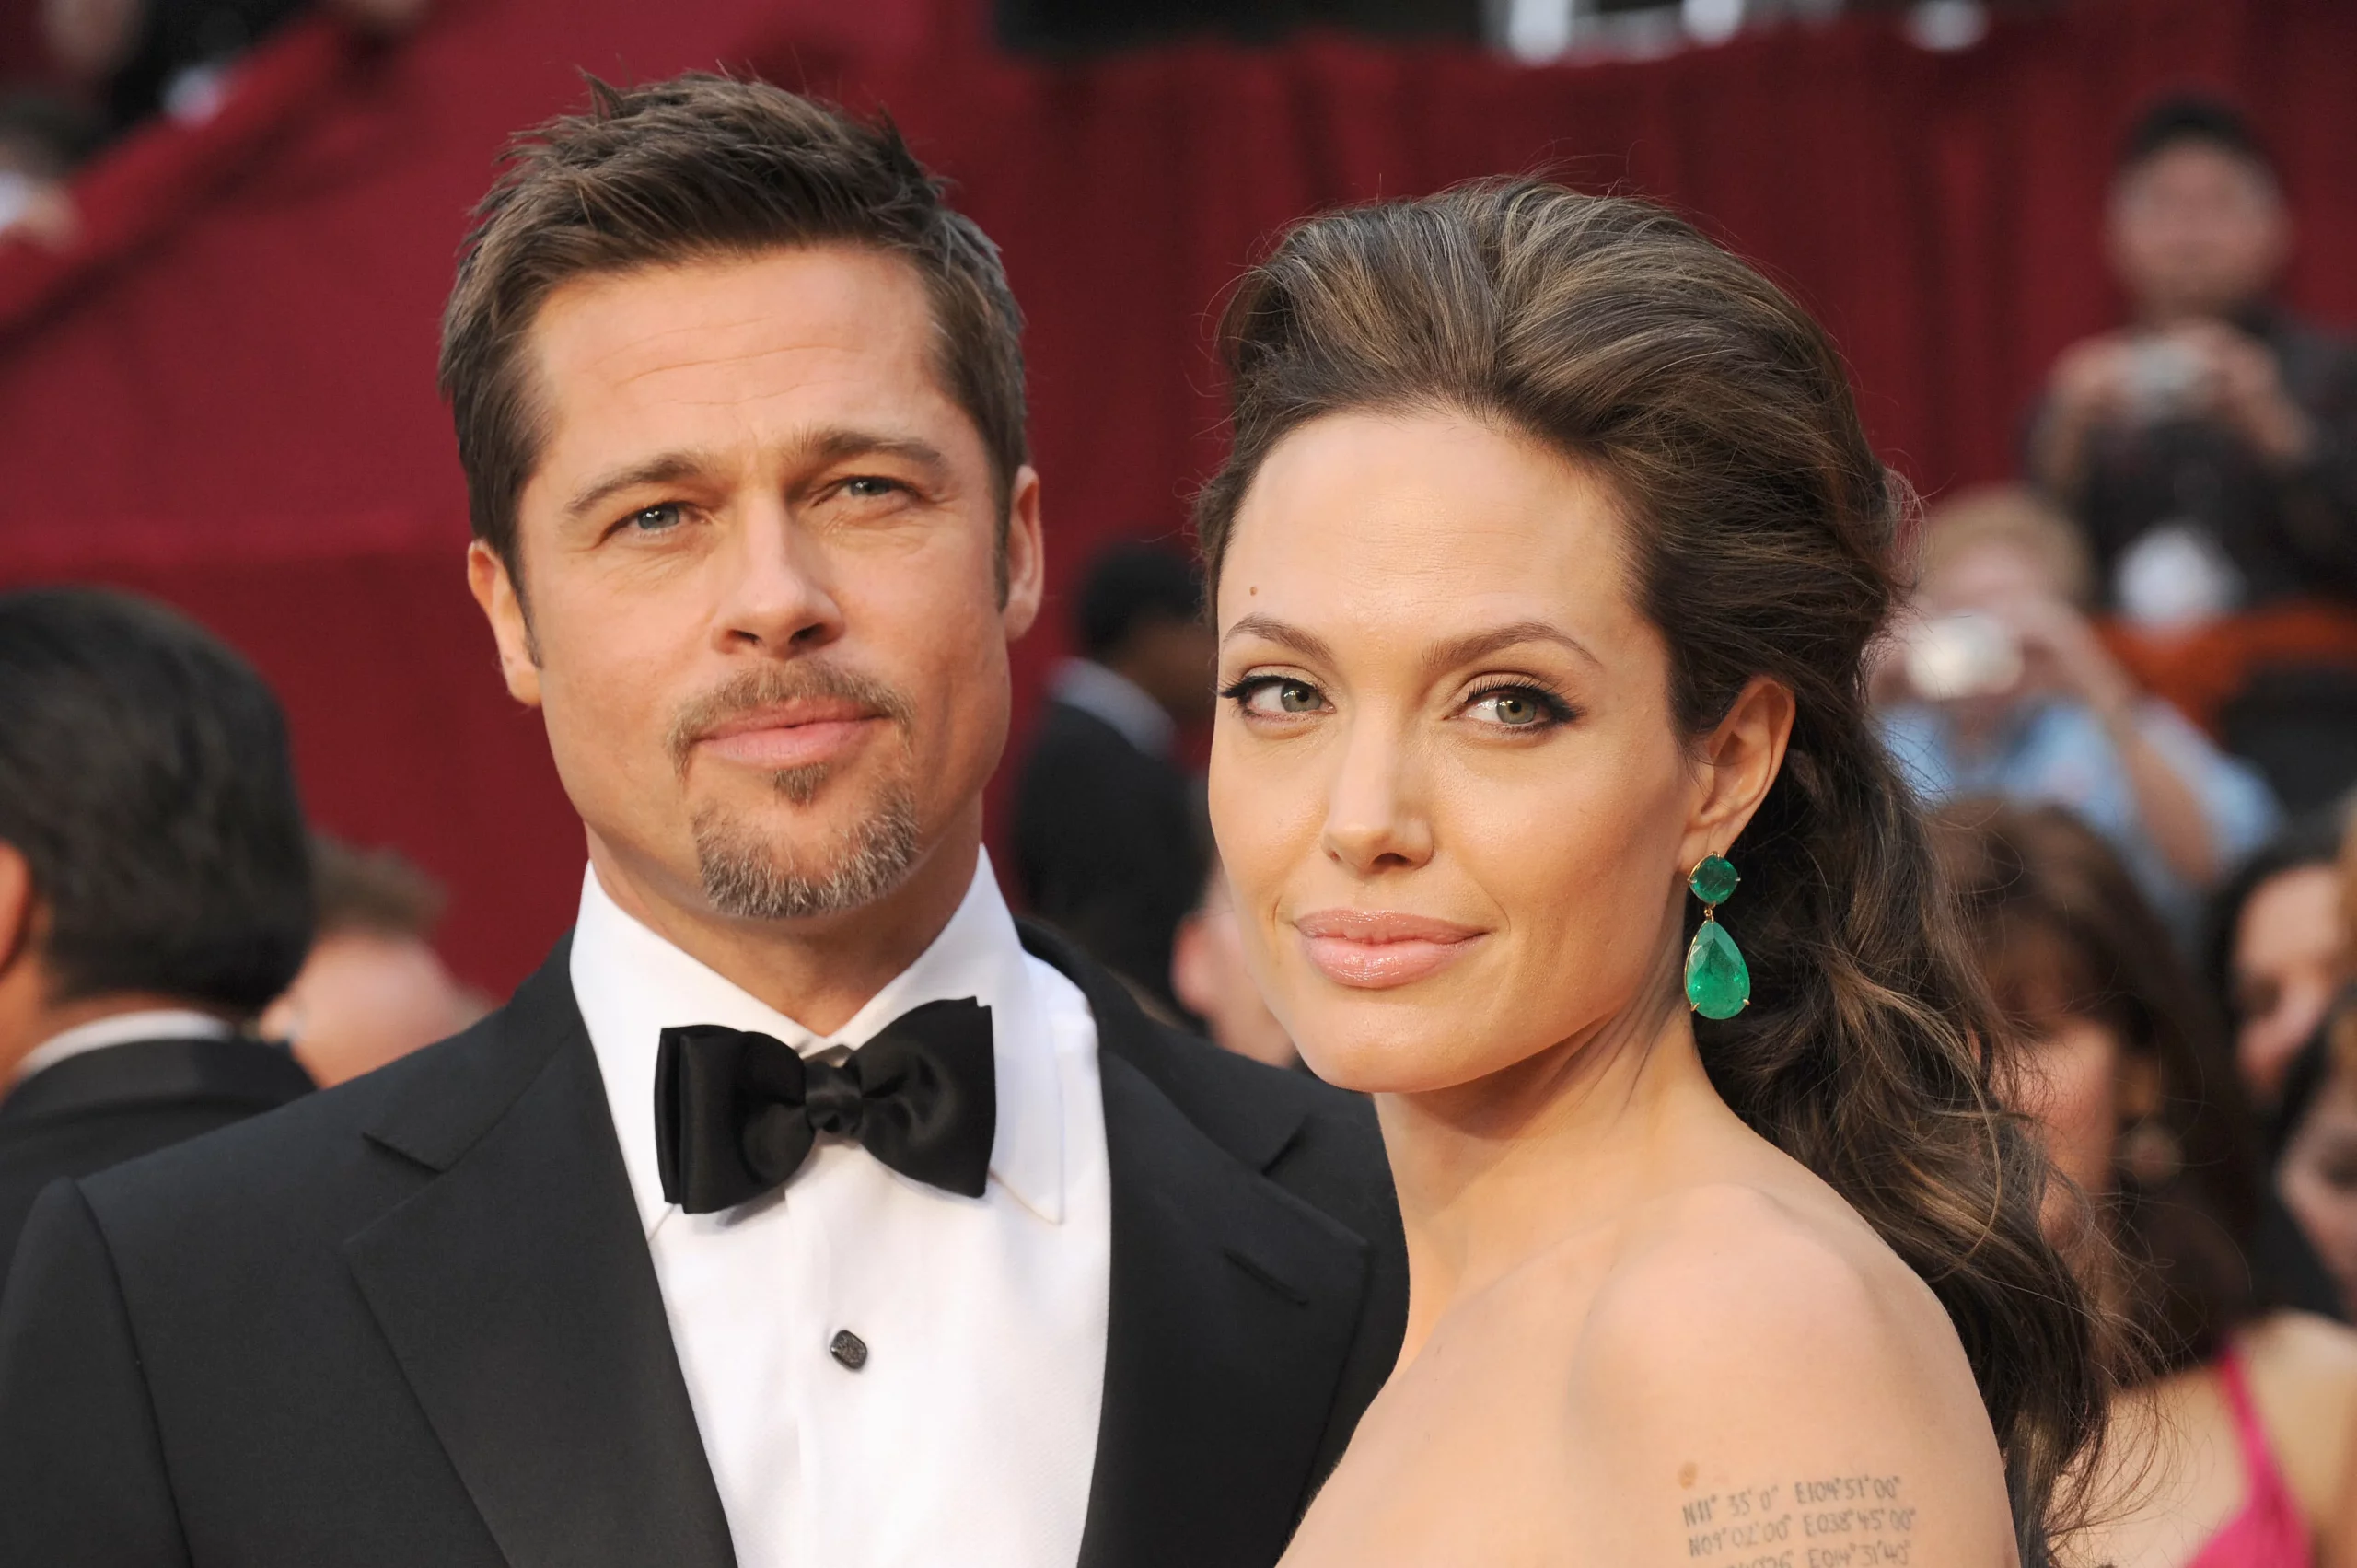 The legal battle has been messy between Angelina Jolie and Brad Pitt.